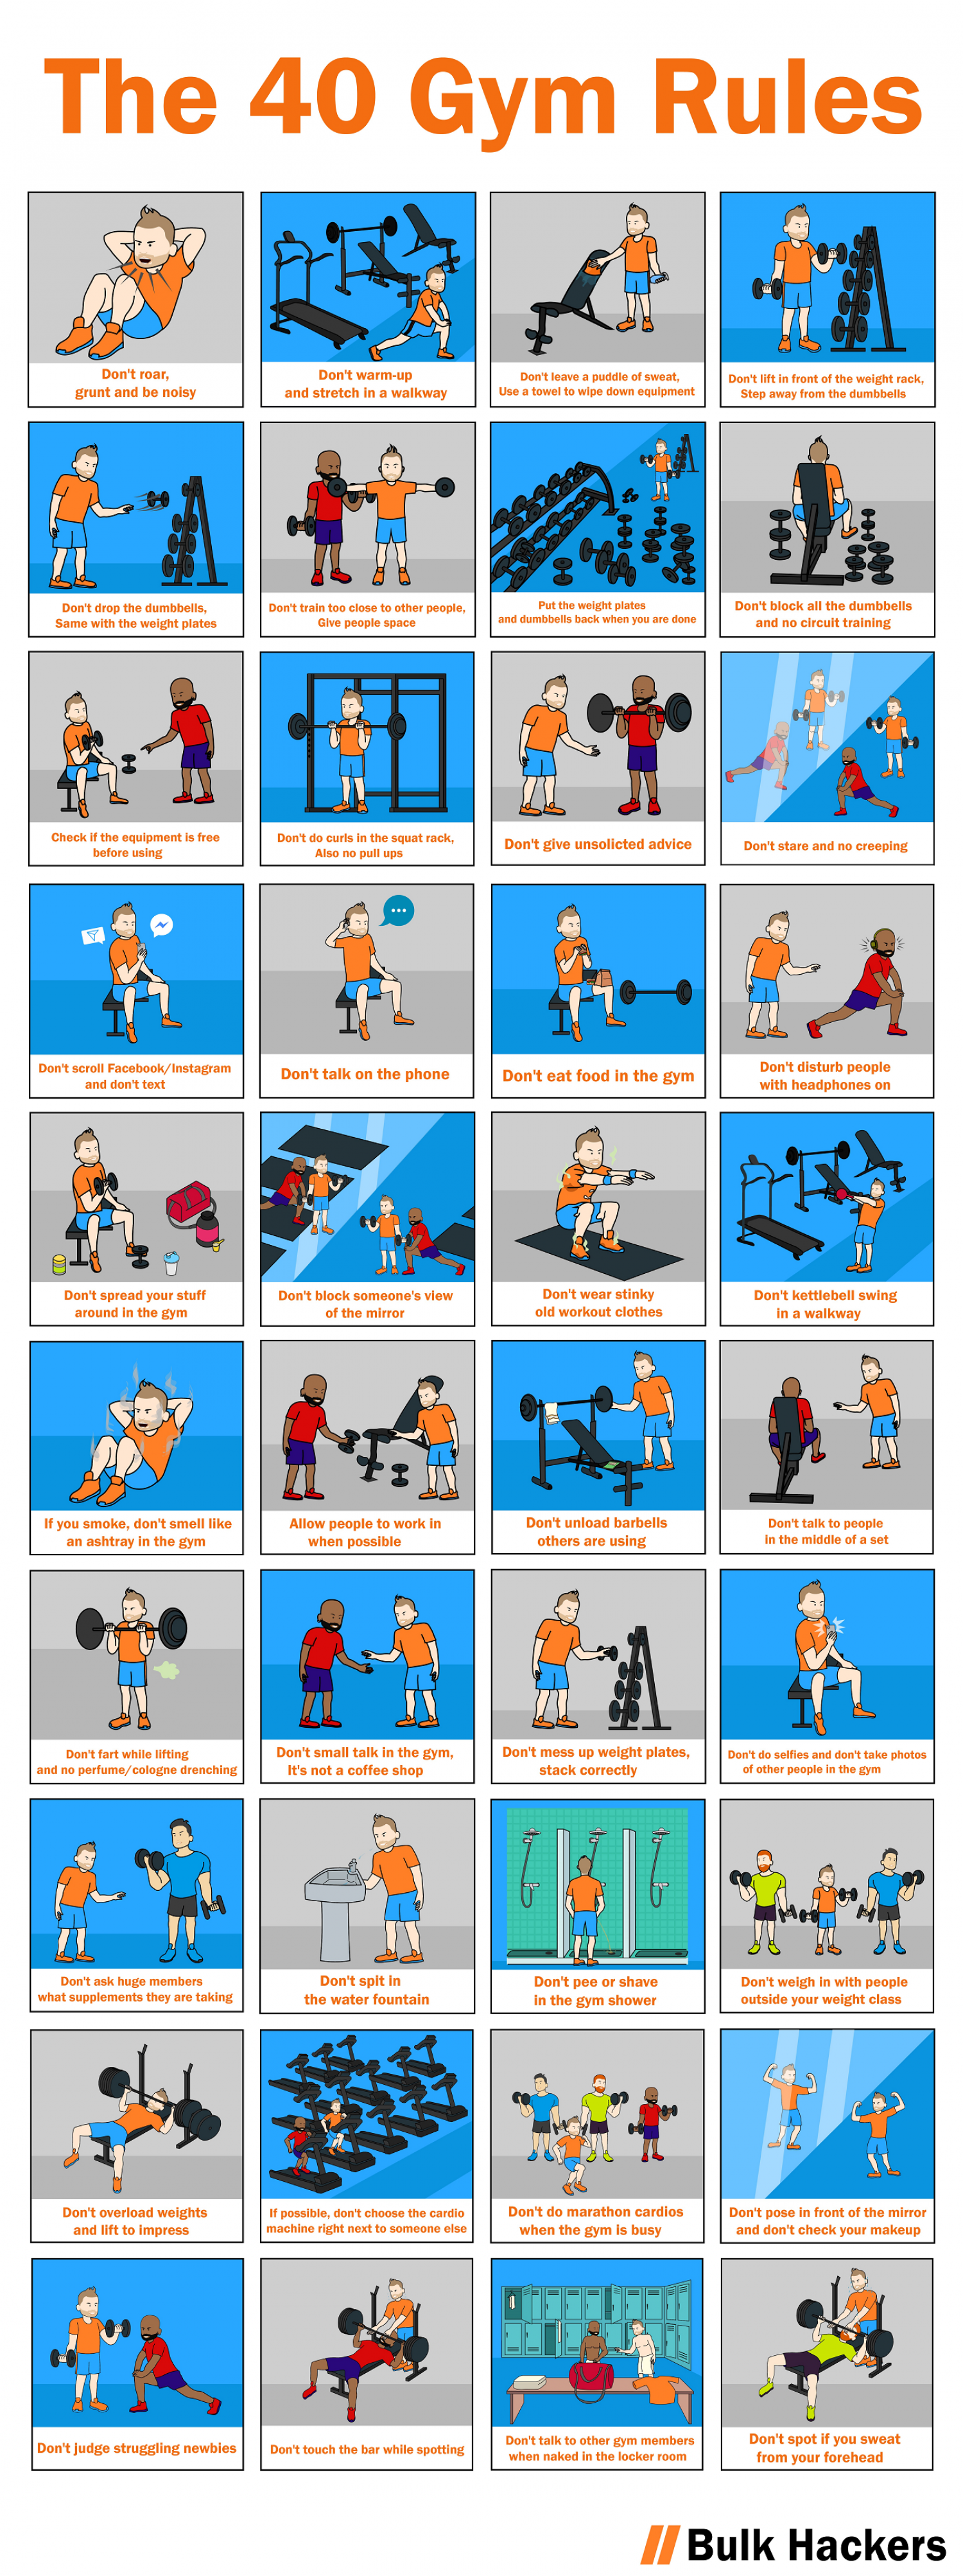 Gym Etiquette: Dos & Don'ts of the Gym